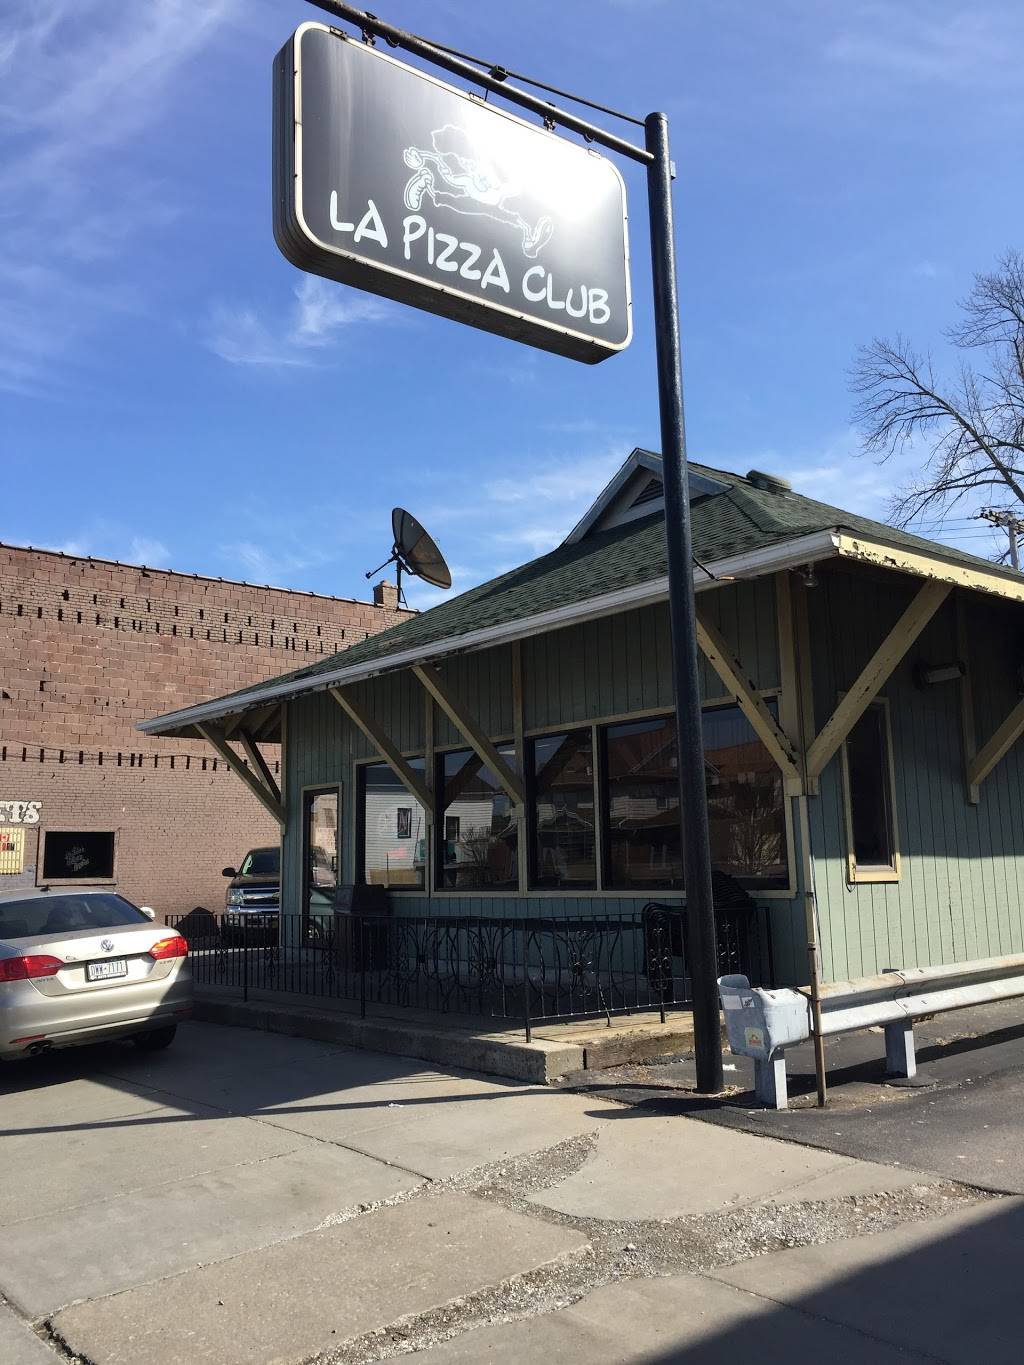 La Pizza Club | meal delivery | 1511 Hertel Ave, Buffalo, NY 14216, USA | 7168373838 OR +1 716-837-3838